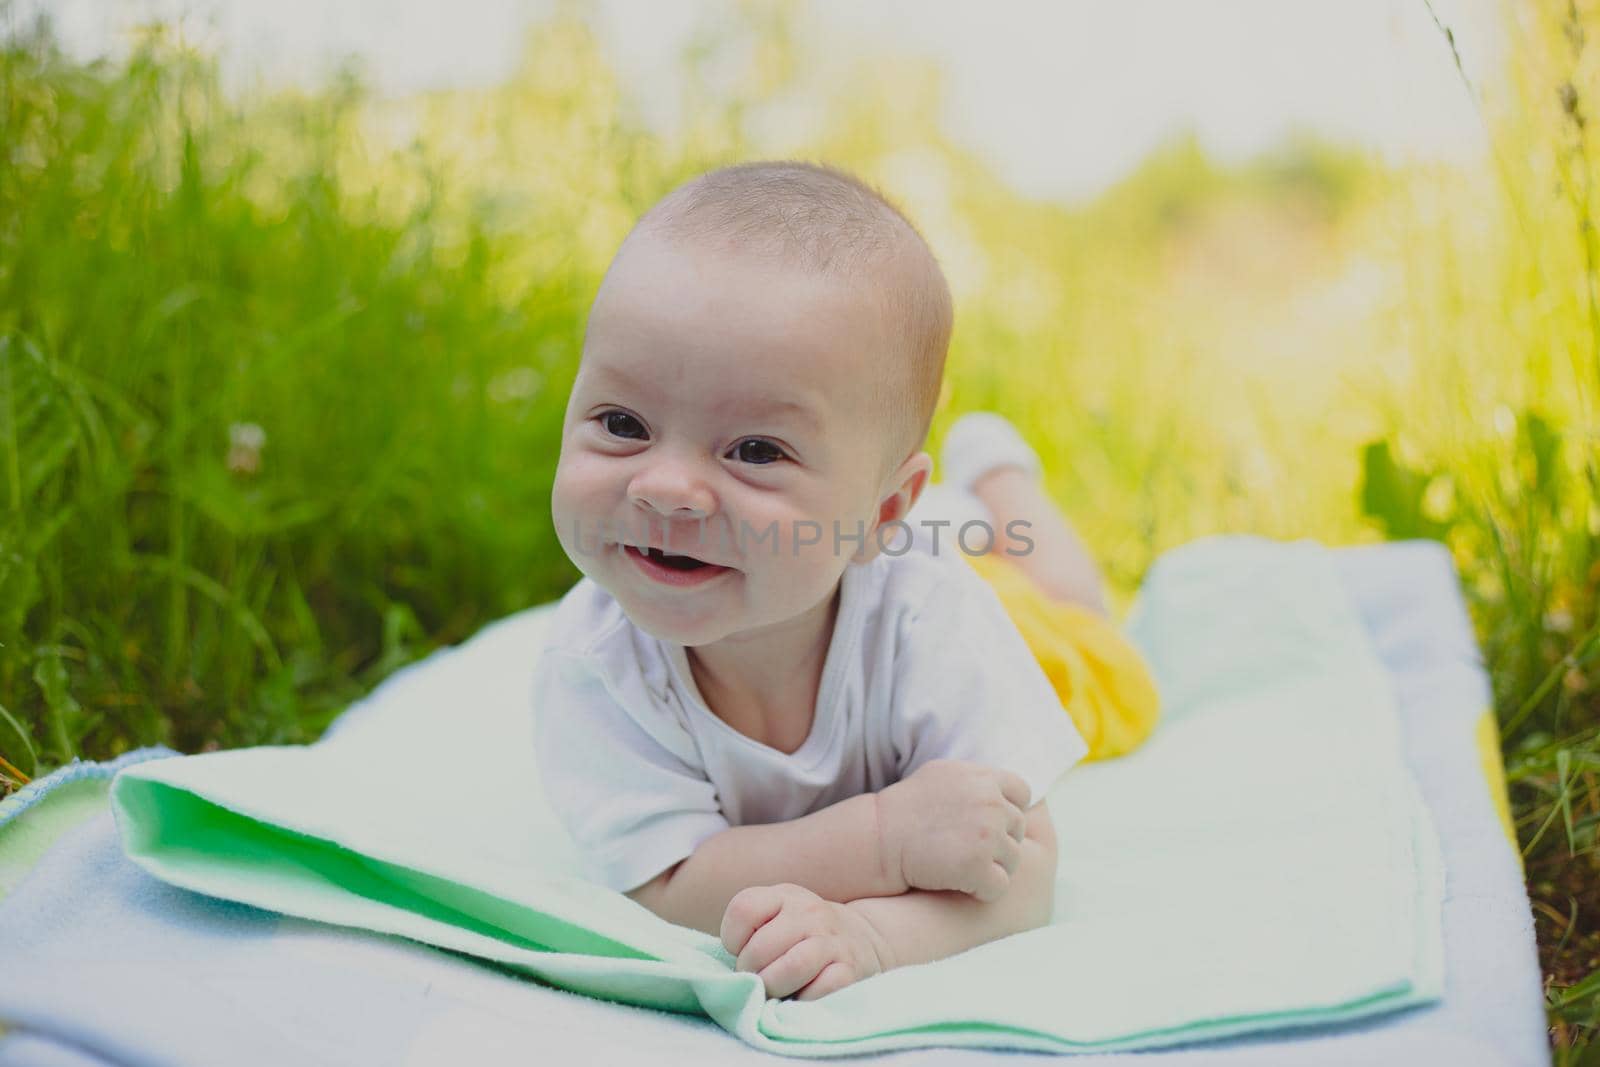 The baby is lying in the grass . A child in nature. Children's article. Copy Space